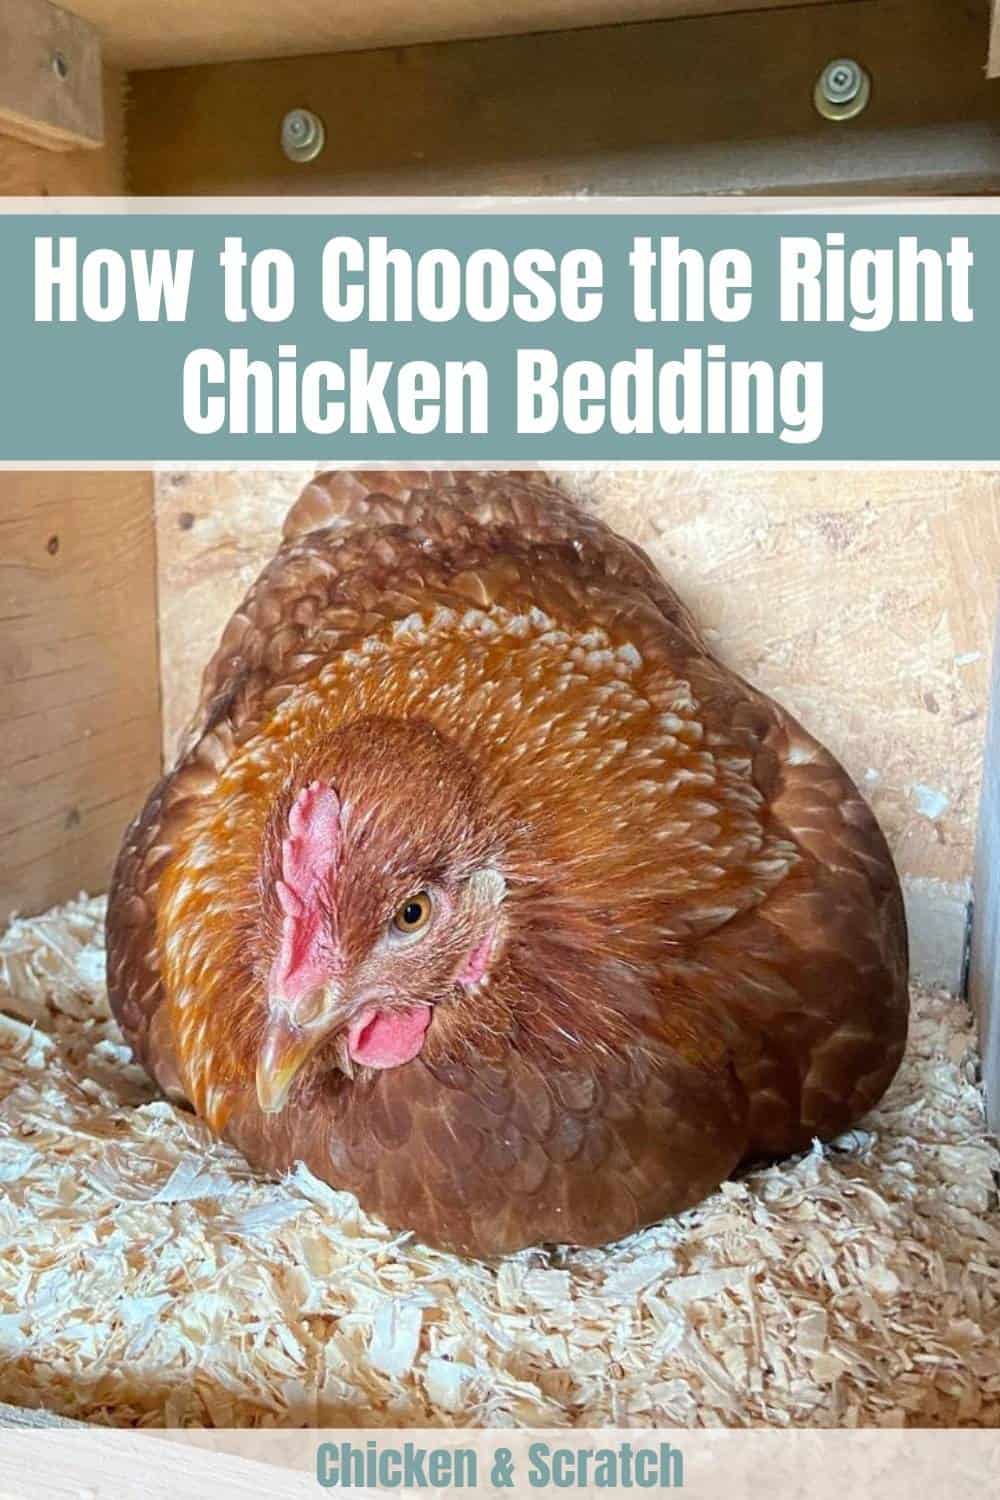 how to choose chicken bedding